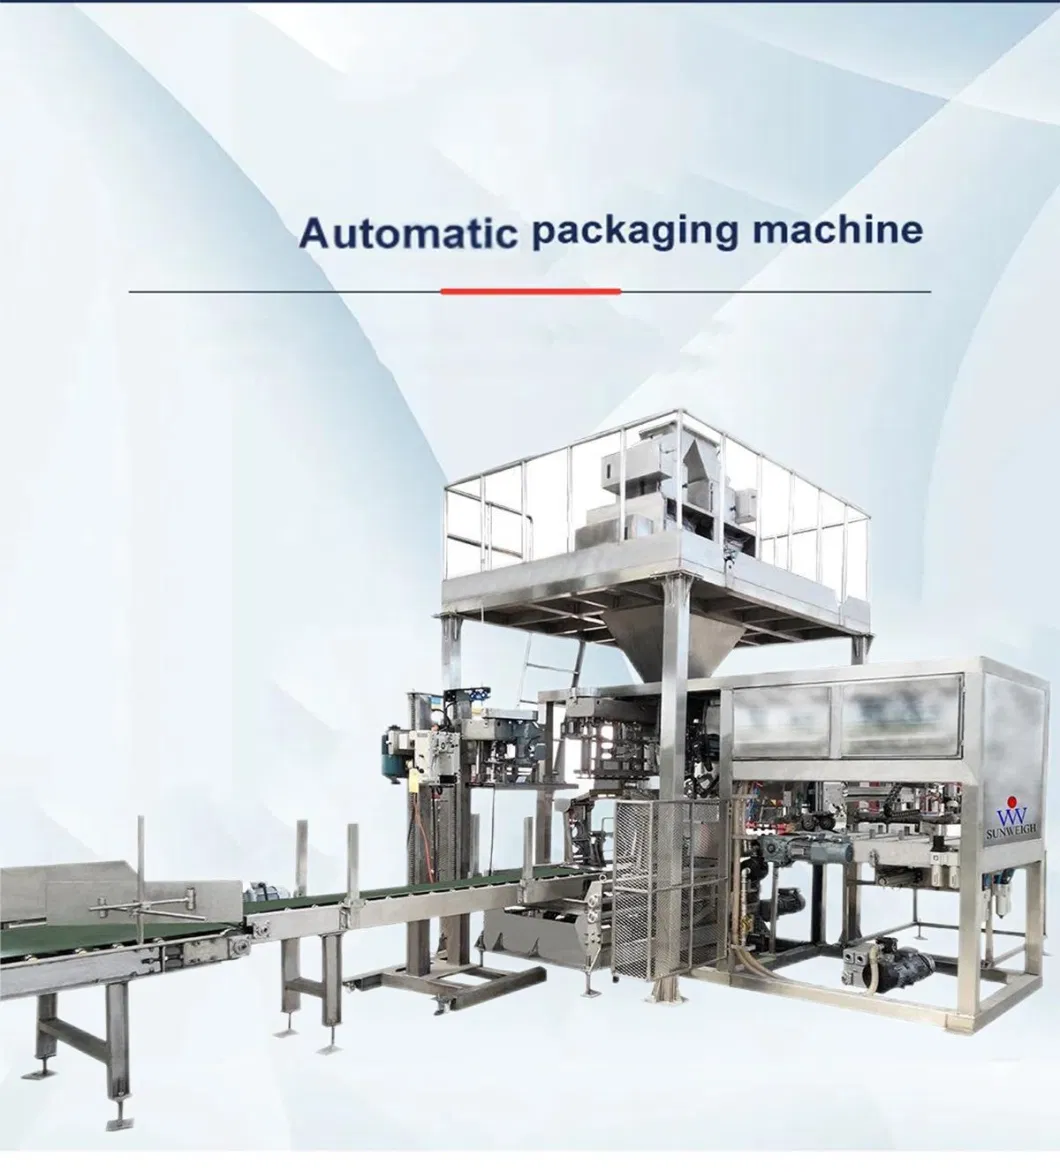 Fully Automatic Industrial Pillow Vacuum Packing Machine for Filling Sealing Packaging Vegetables, Tomato, Pepper, Dates